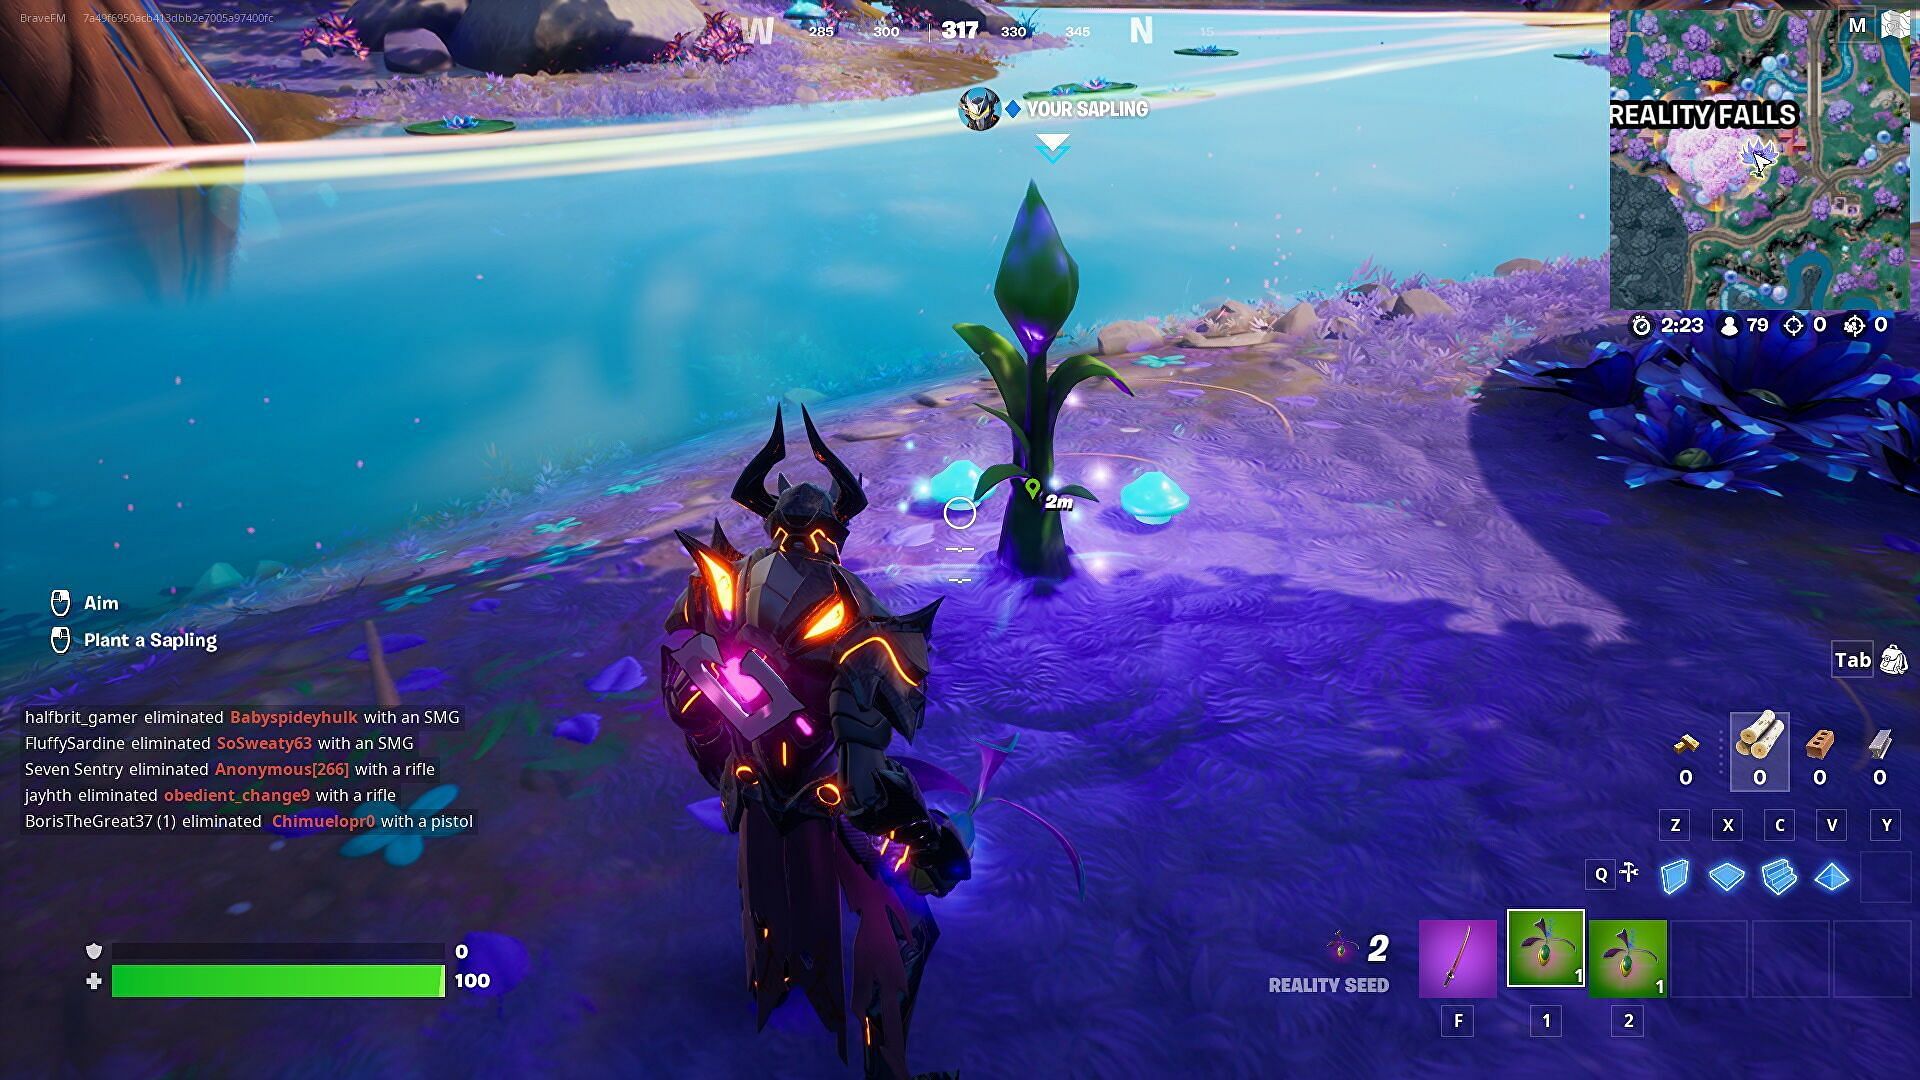 Reality Saplings were first added to Fortnite in Chapter 3 Season 3 (Image via Epic Games)